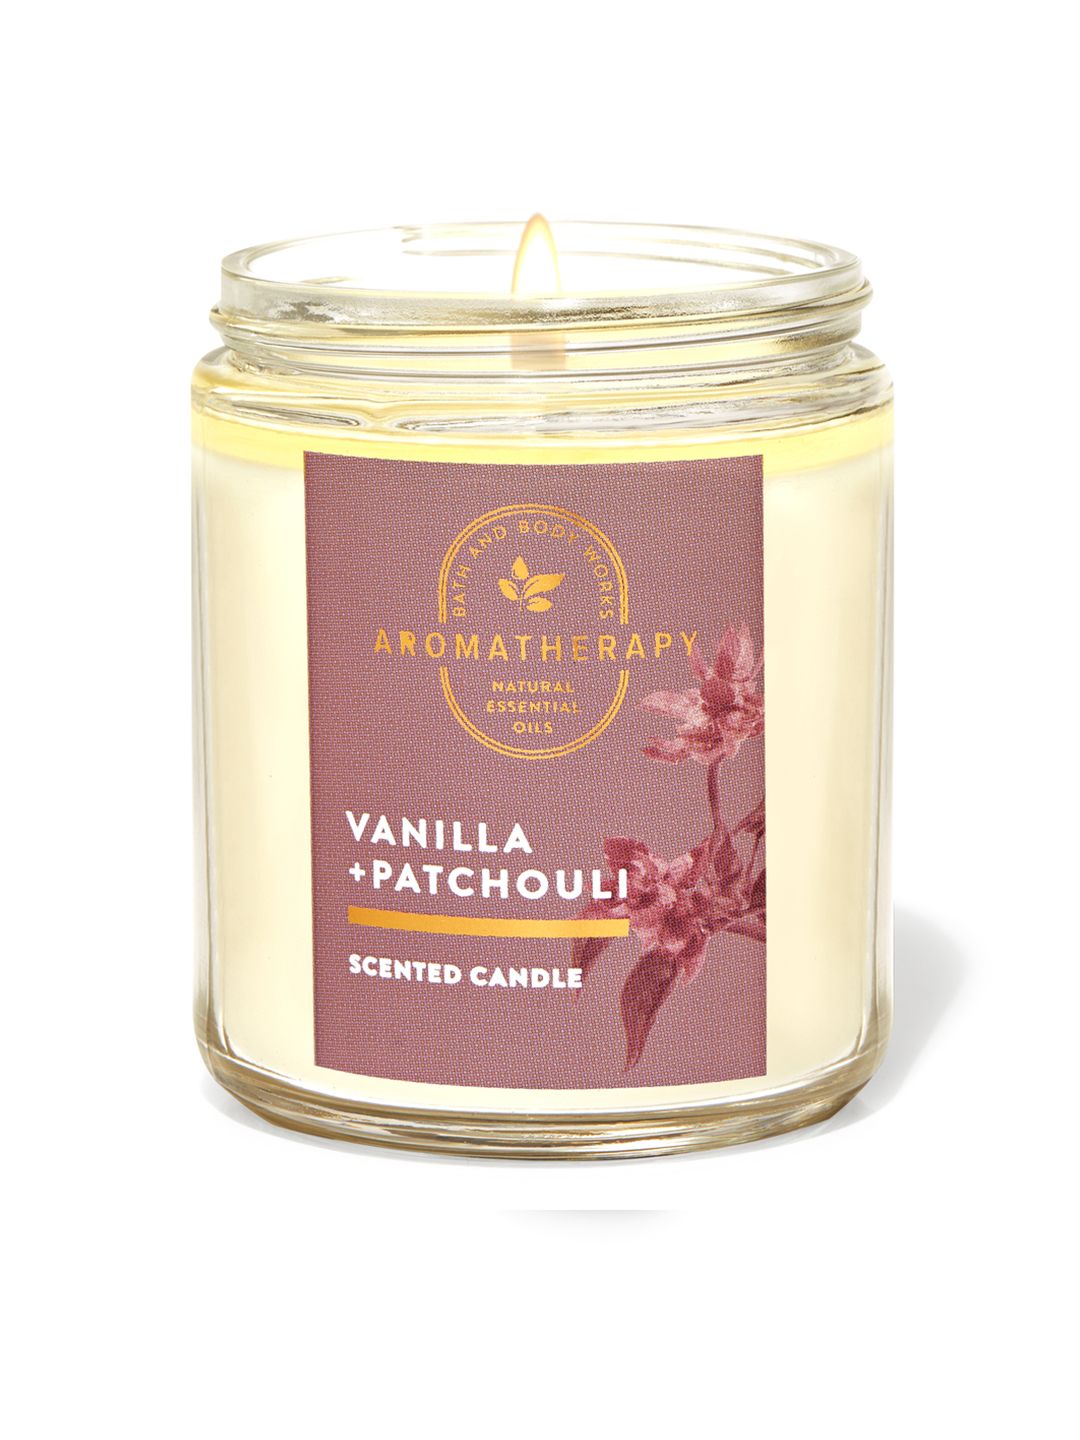 Bath & Body Works Aromatherapy Vanilla Patchouli Single Wick Scented Candle - 198 g Price in India